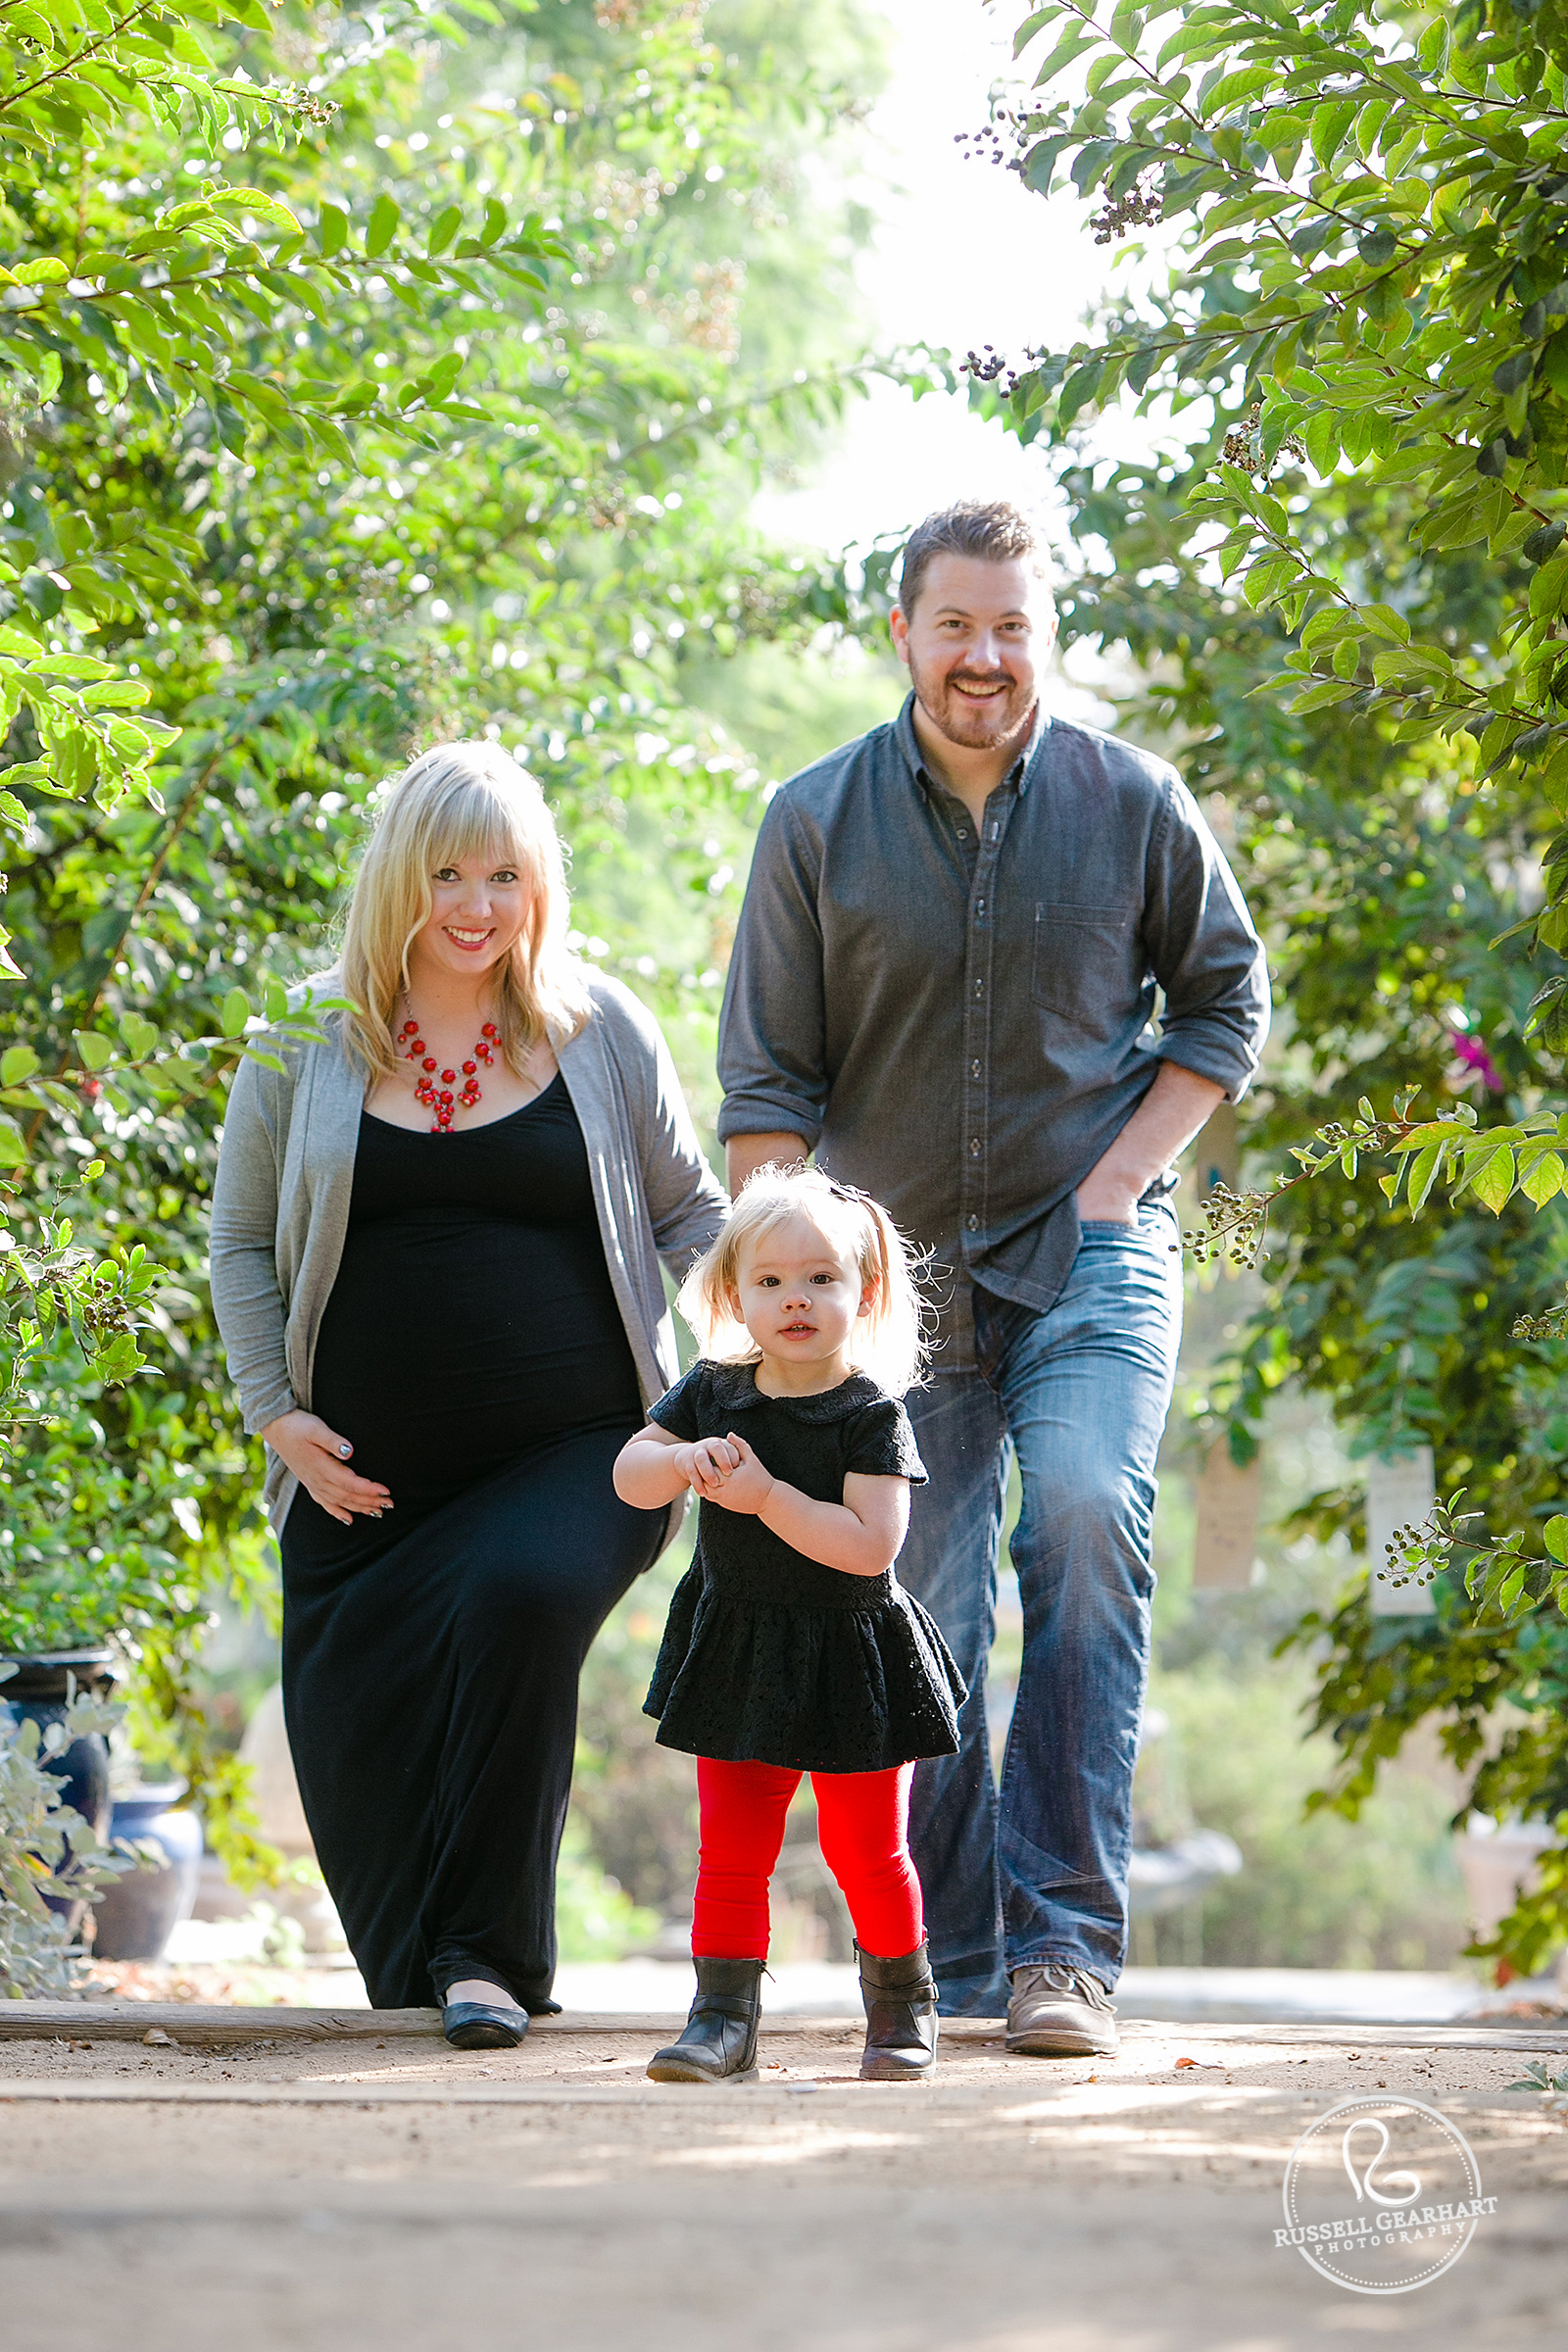 Pasadena Family Portrait: Goyette Family, Local Garden in Pasadena, CA – Russell Gearhart Photography – www.gearhartphoto.com 